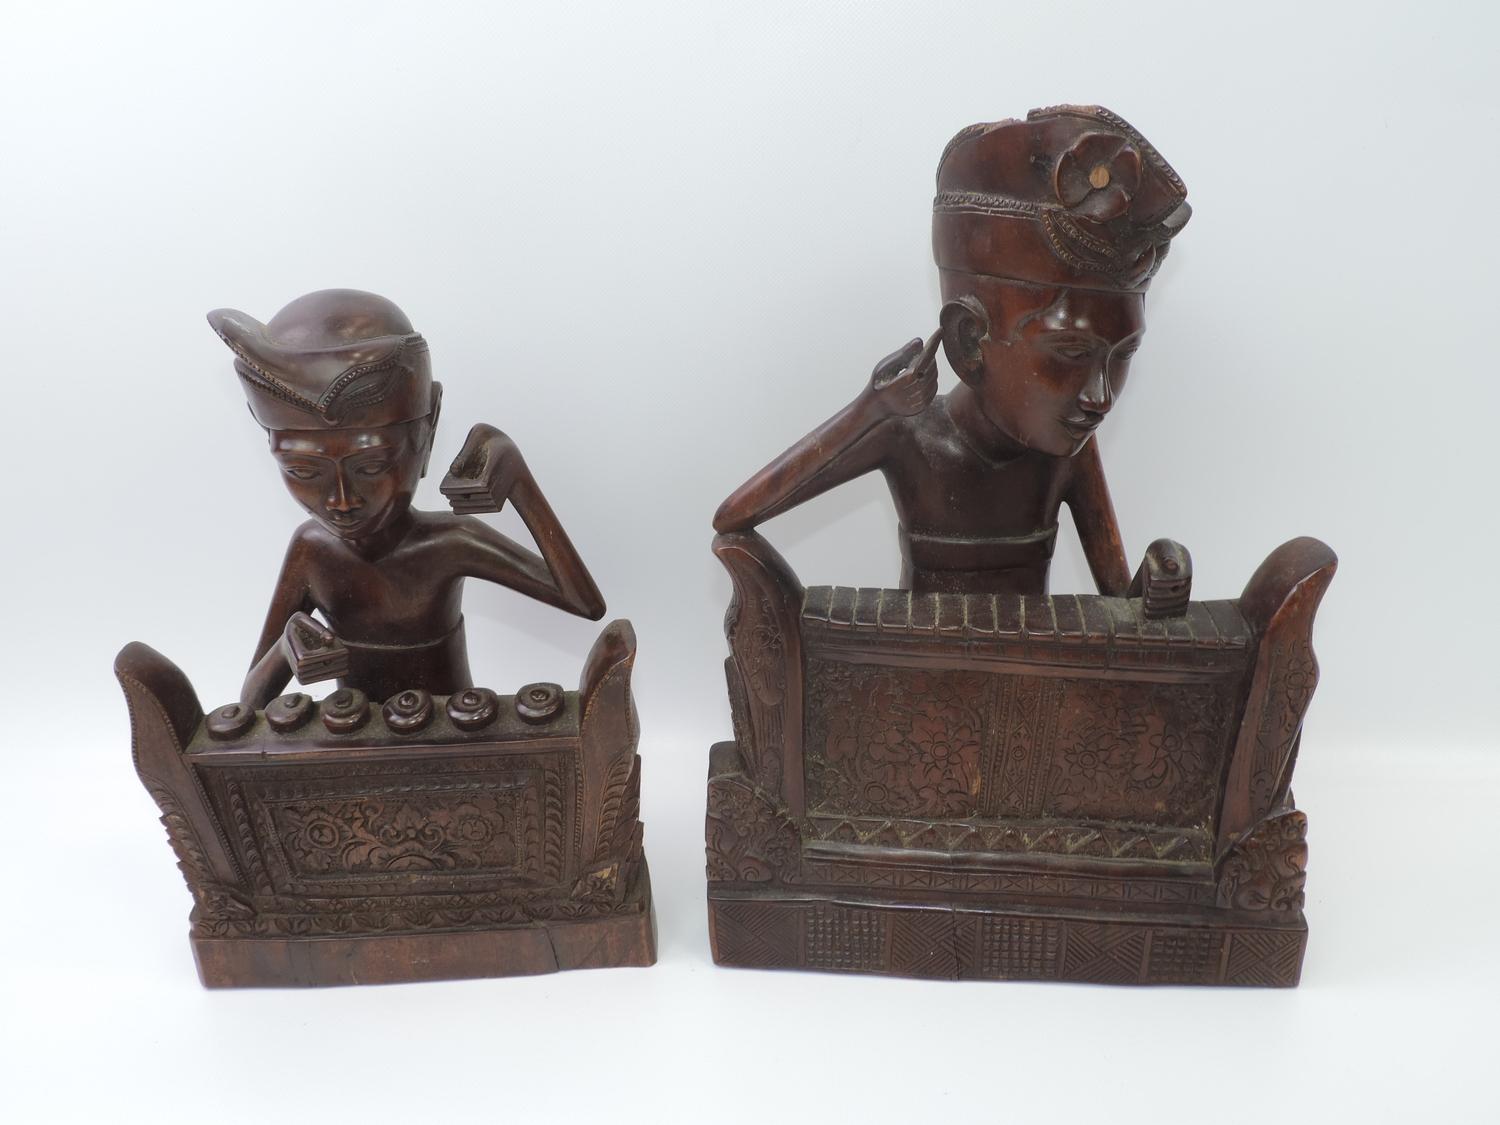 2x Large Carved Dark Wood Oriental Pieces Depicting Figures Playing Musical Instruments